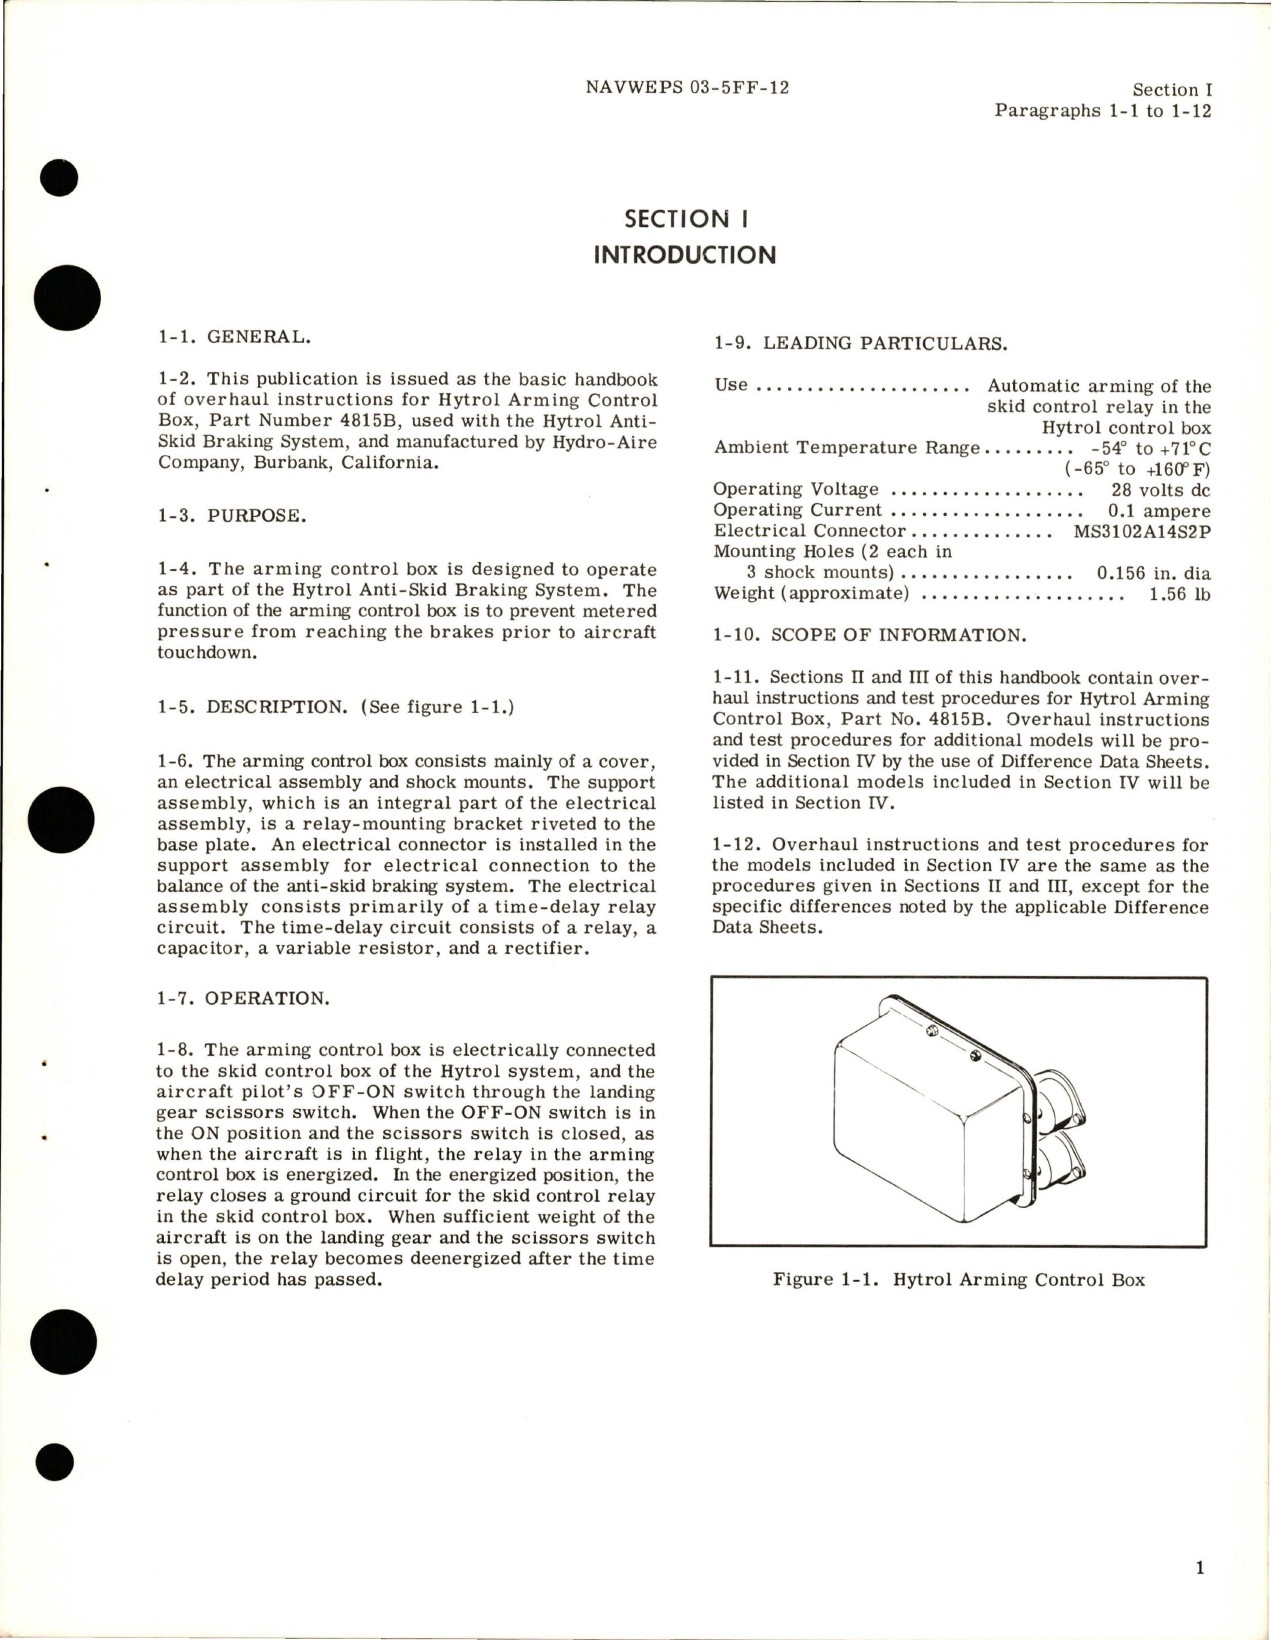 Sample page 5 from AirCorps Library document: Overhaul Instructions for Hytrol Arming Control Box - Part 4815B 